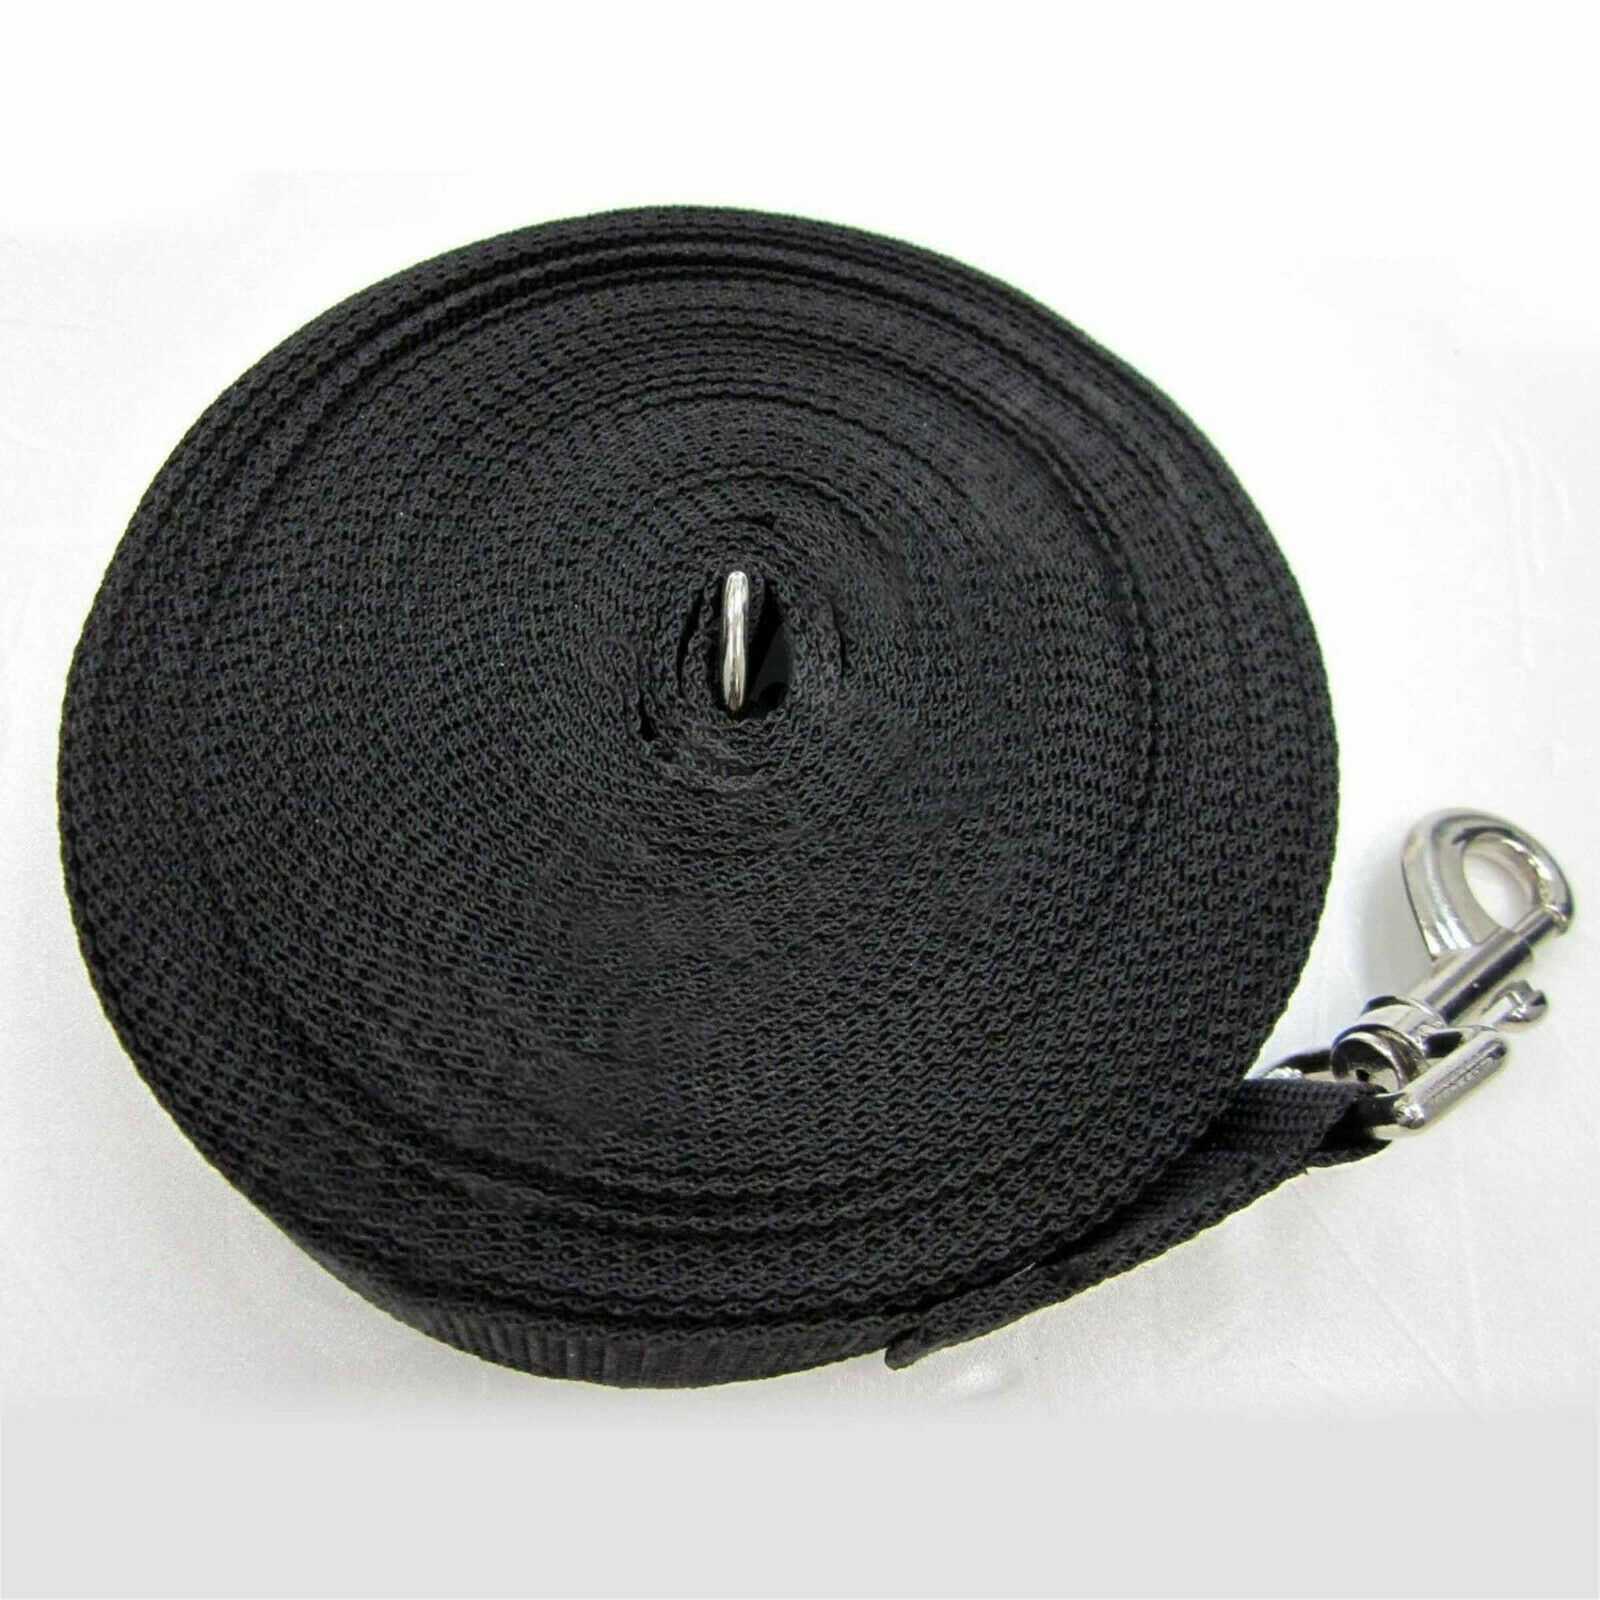 Black Dog Pet Puppy Training Lead Leash 50ft 15m Long Obedience Recall 1 Inch Wide